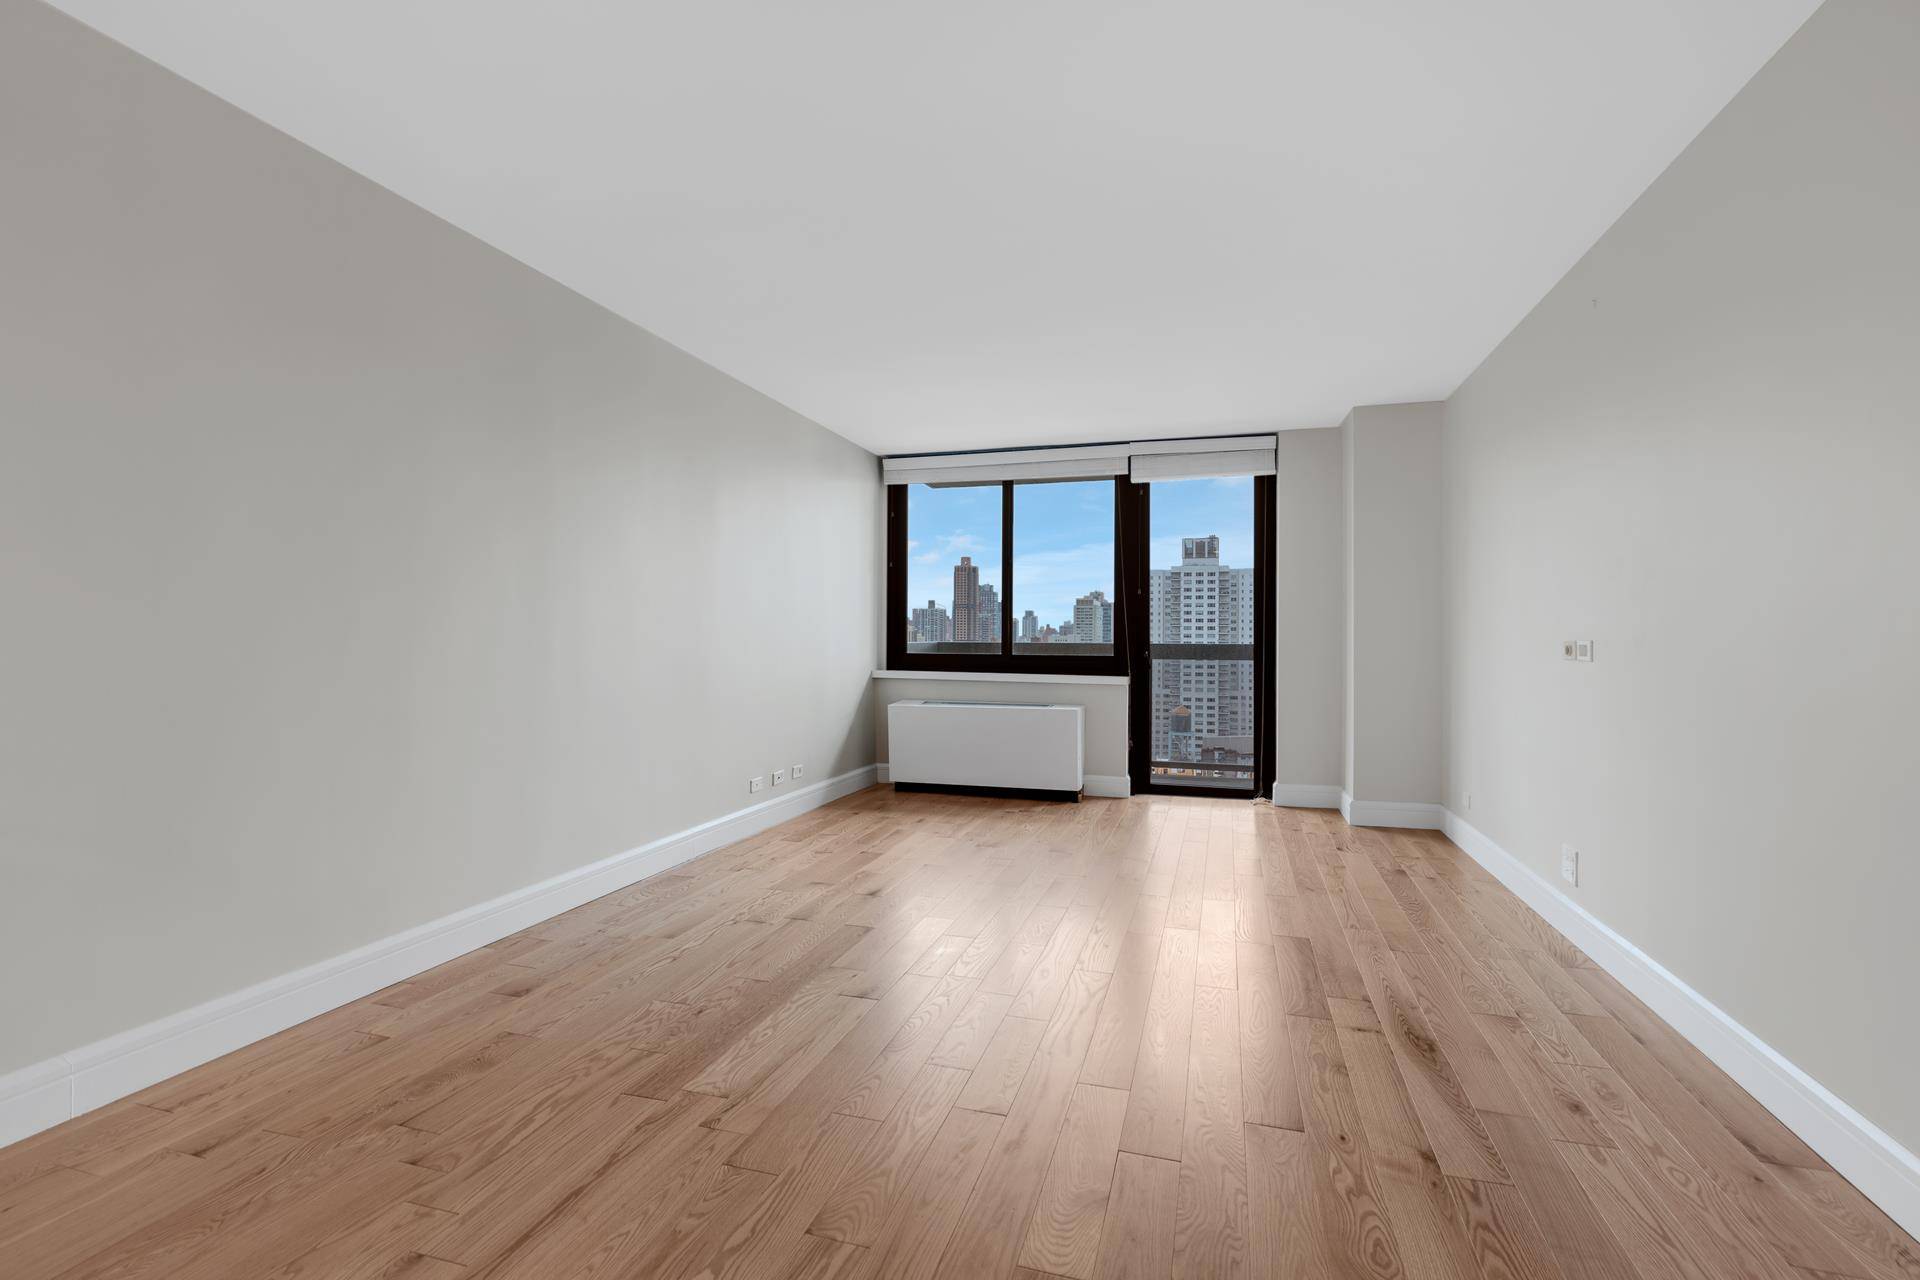 1 bedroom with East river views.